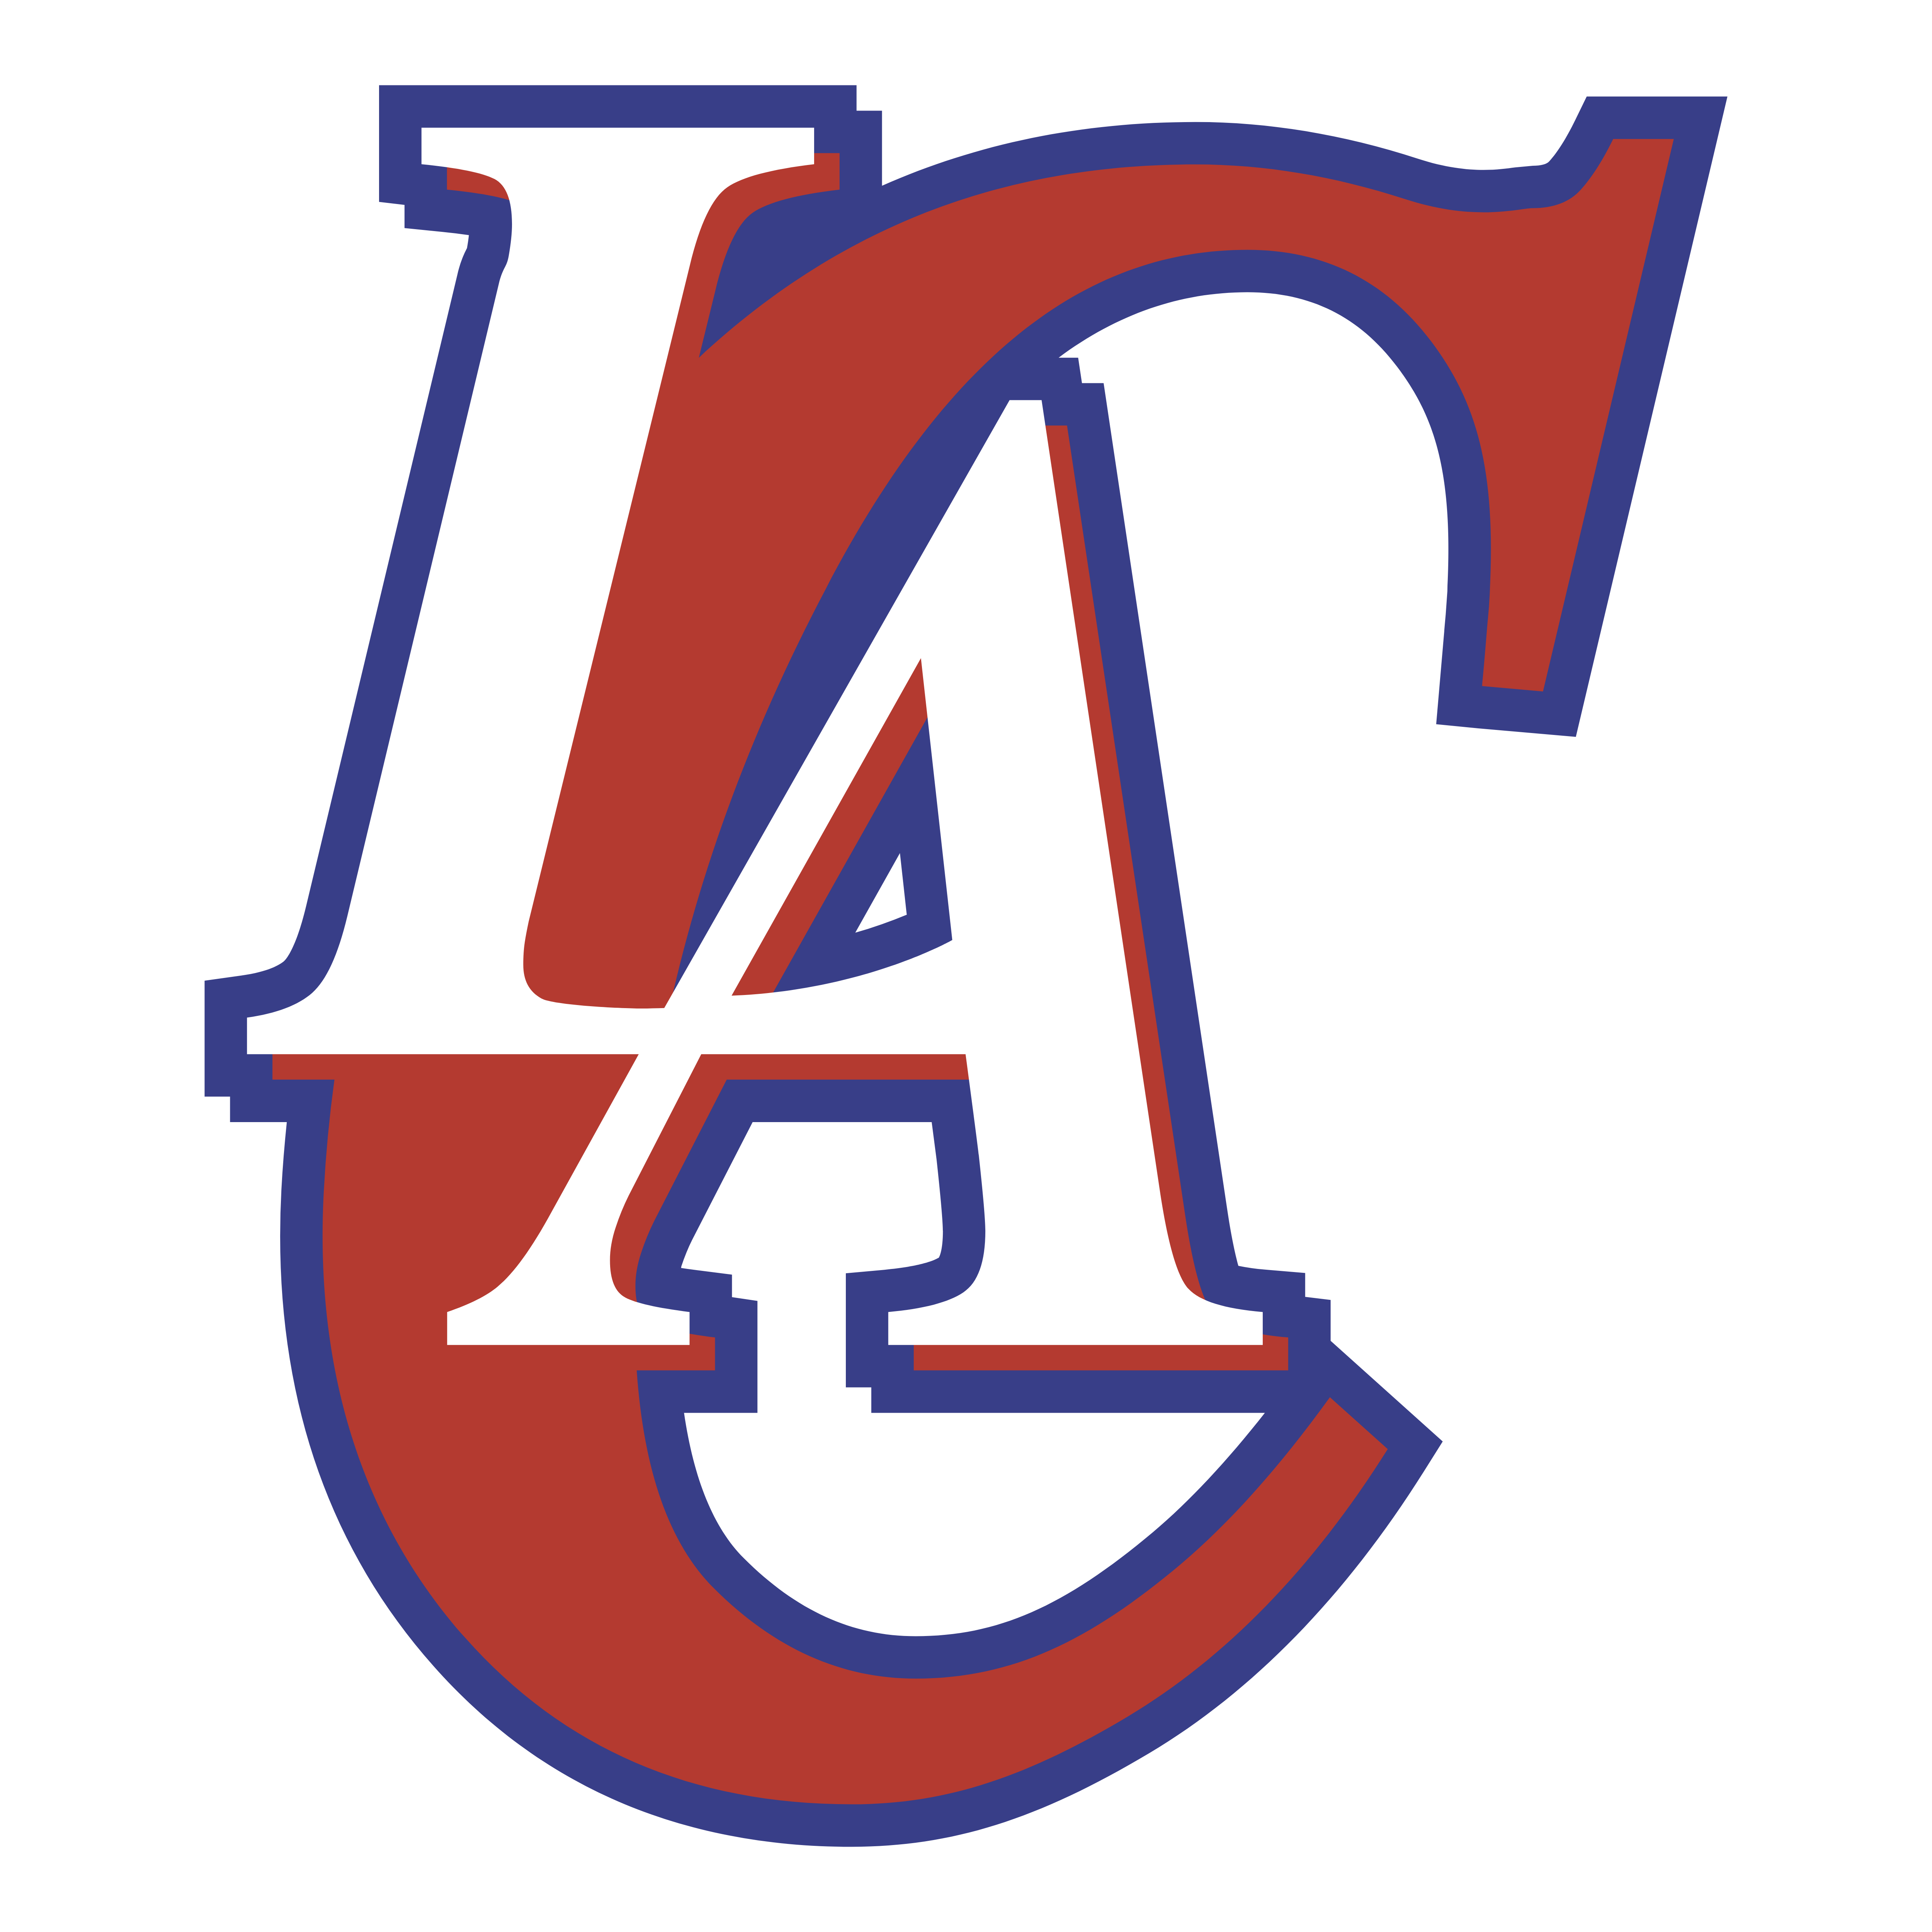 Los Angeles Clippers - Logos Download